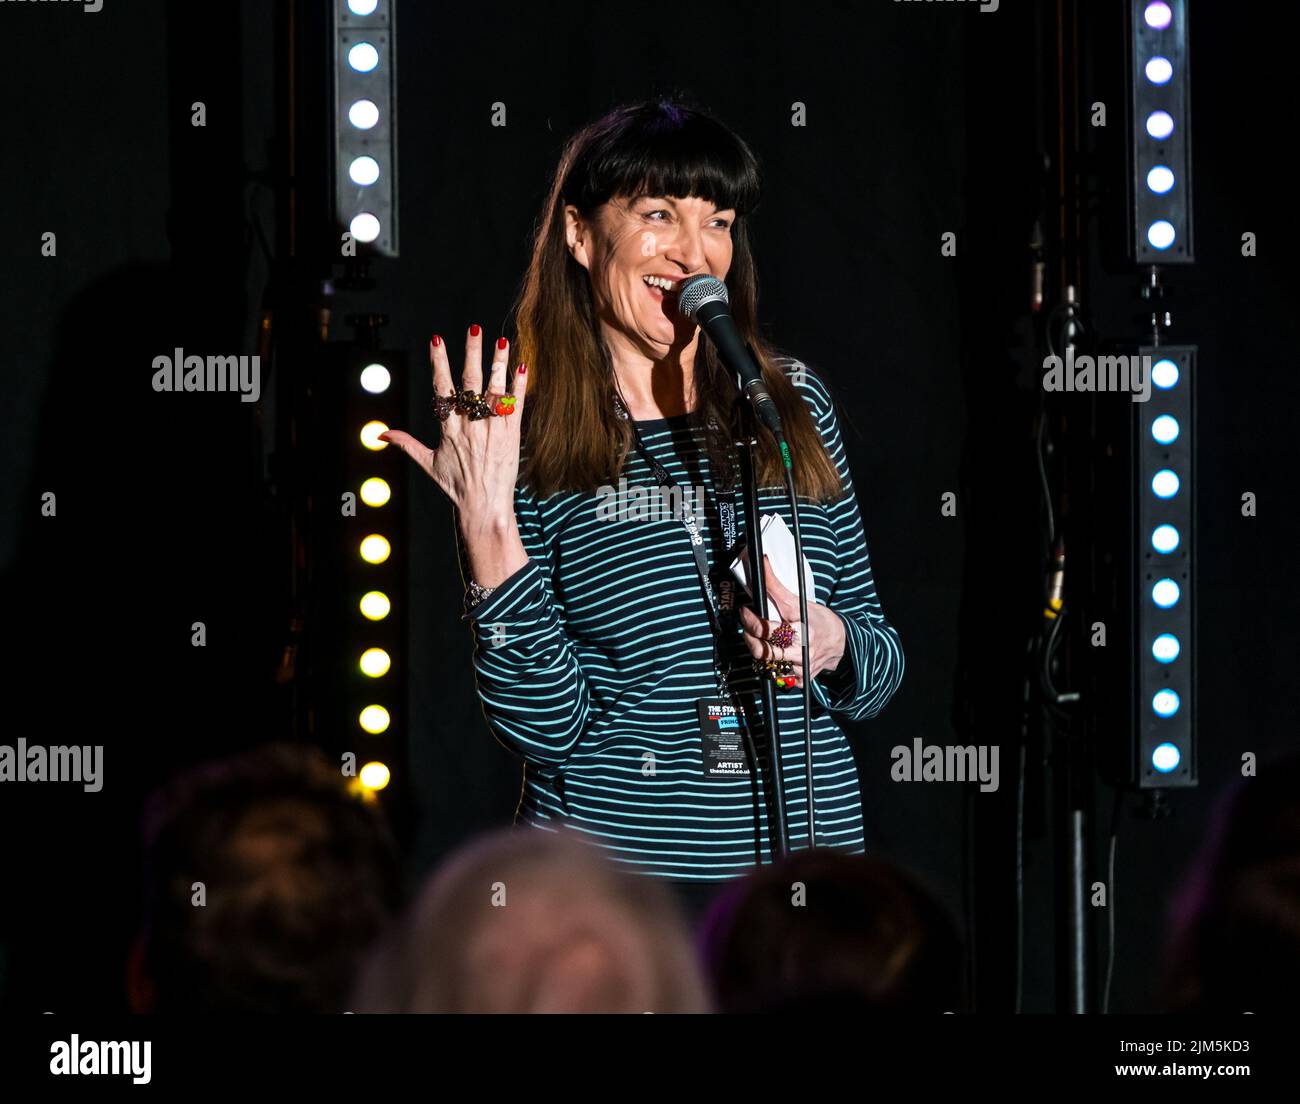 Edinburgh, Scotland, United Kingdom, 4th August 2022. Edinburgh Festival Fringe: The Stand Comedy Club presents a showcase of the comedic talent on offer at this year's Fringe at the New Town Theatre. Pictured: Mary Bourke. Credit: Sally Anderson/Alamy Live News Stock Photo